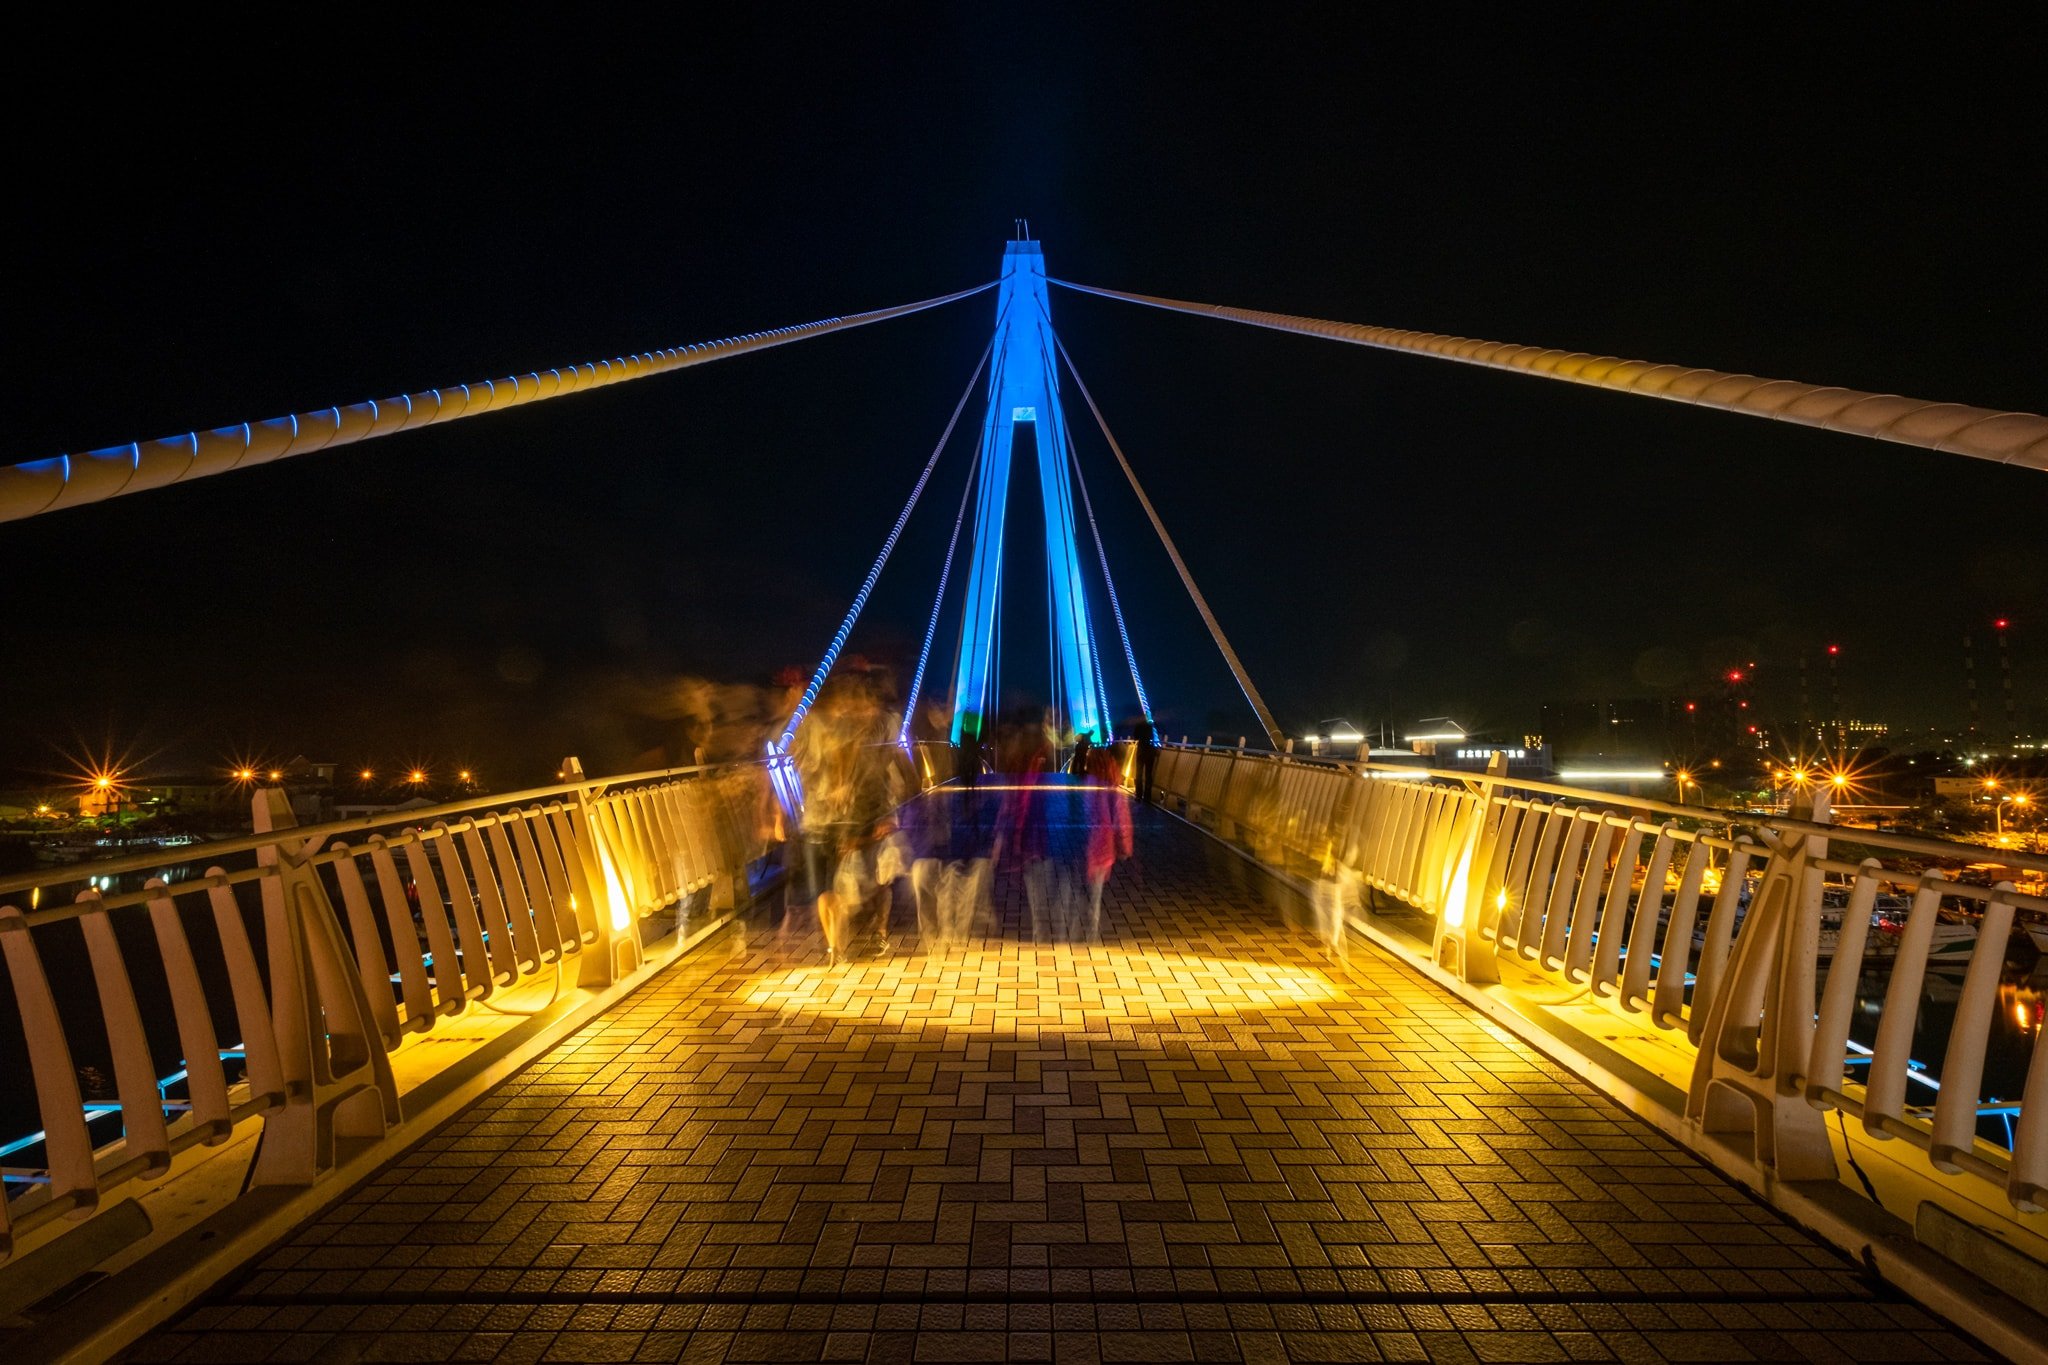 Due to the long exposure people look ghostly while walking on the Lovers Bridge by night. Tamsui Fisherman's Wharf. New Taipei City, Taiwan.